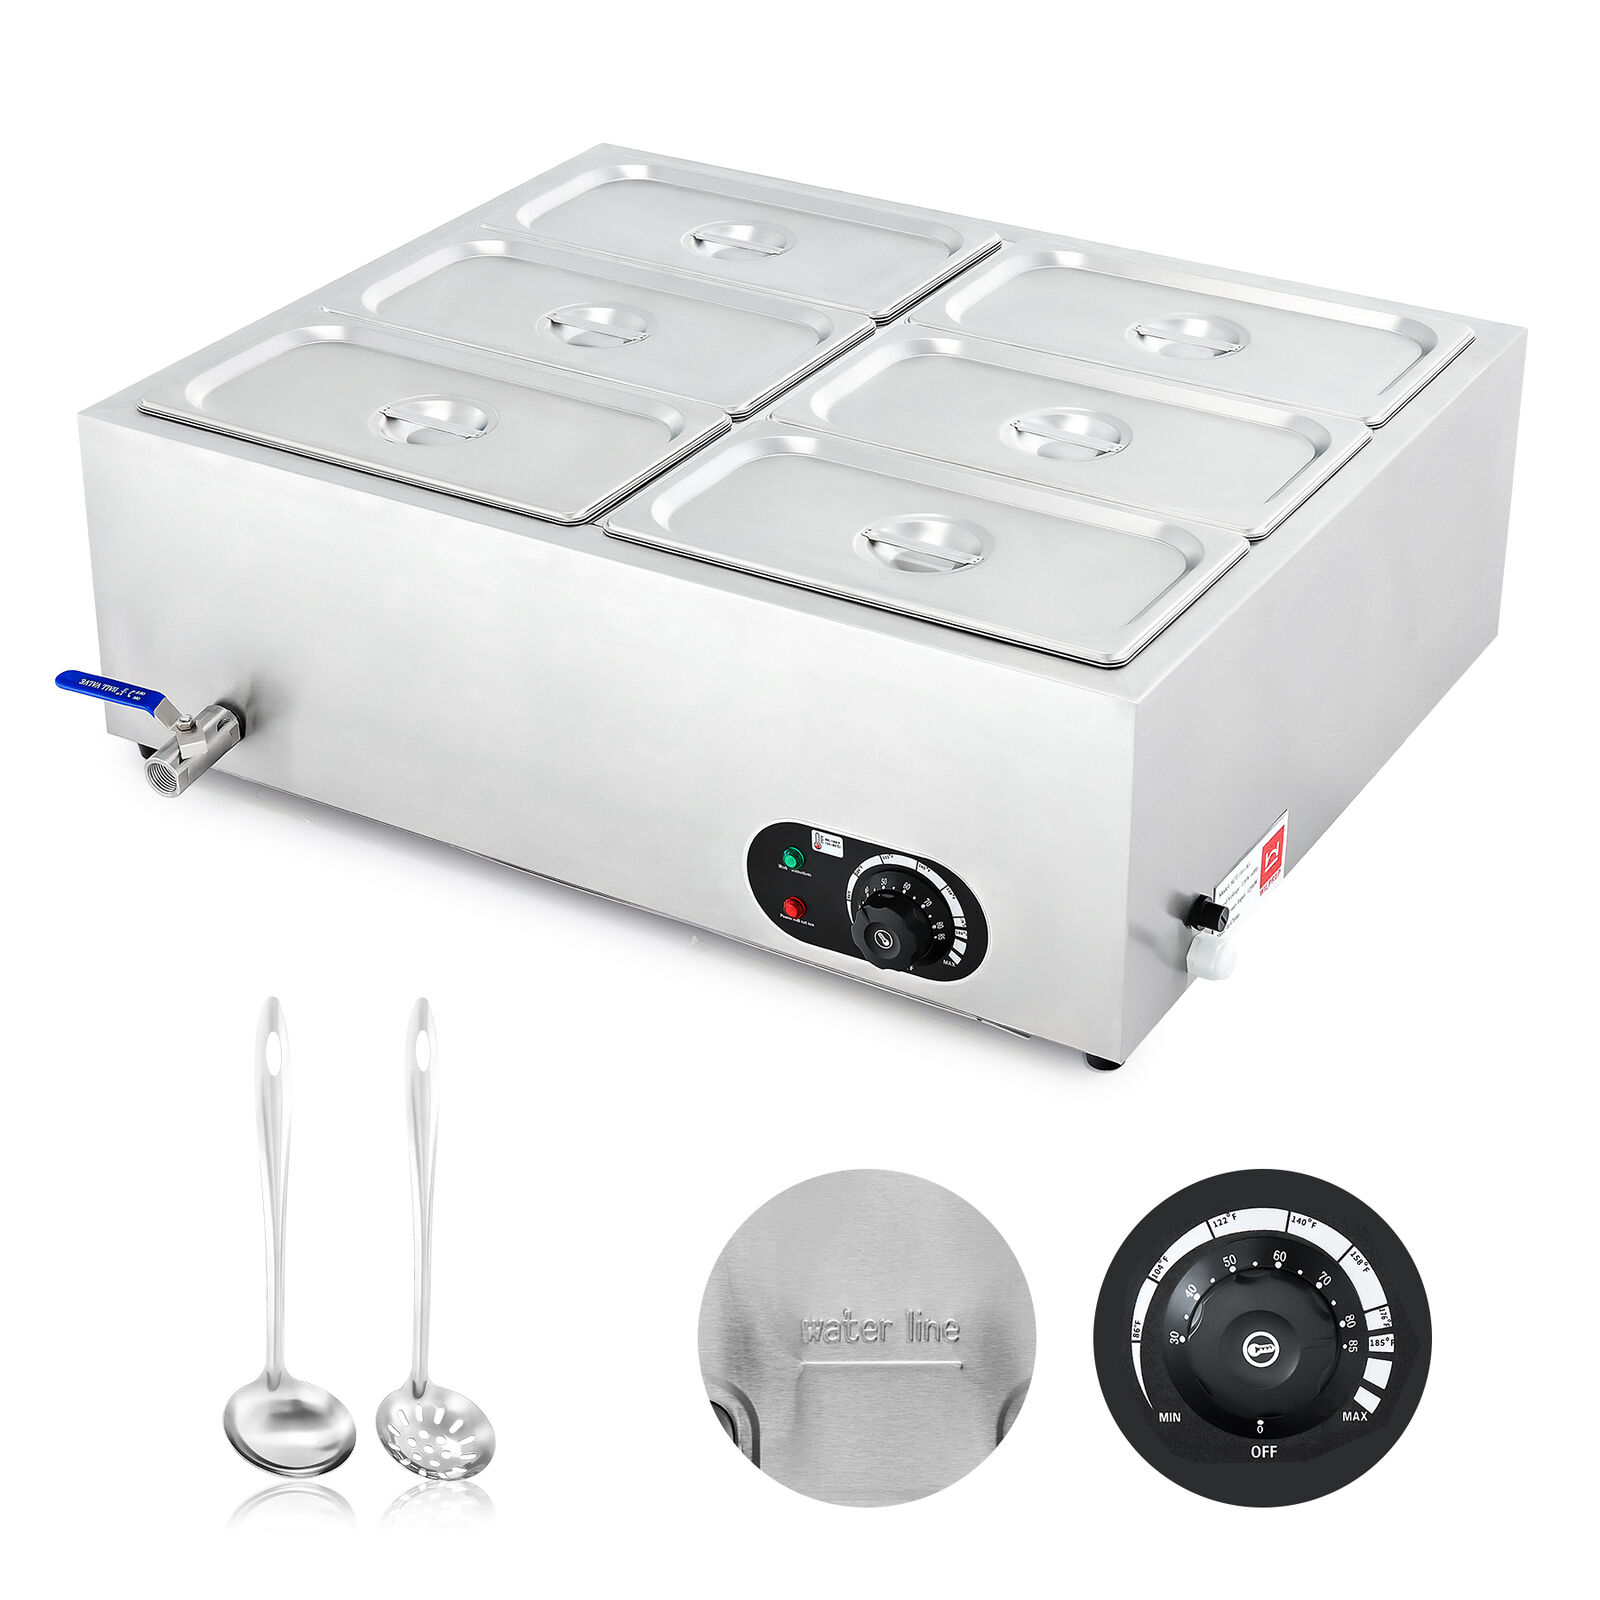 39Q 6-Pan Commercial Food Warmer 1200W Bain Marie Steam Table Countertop Station